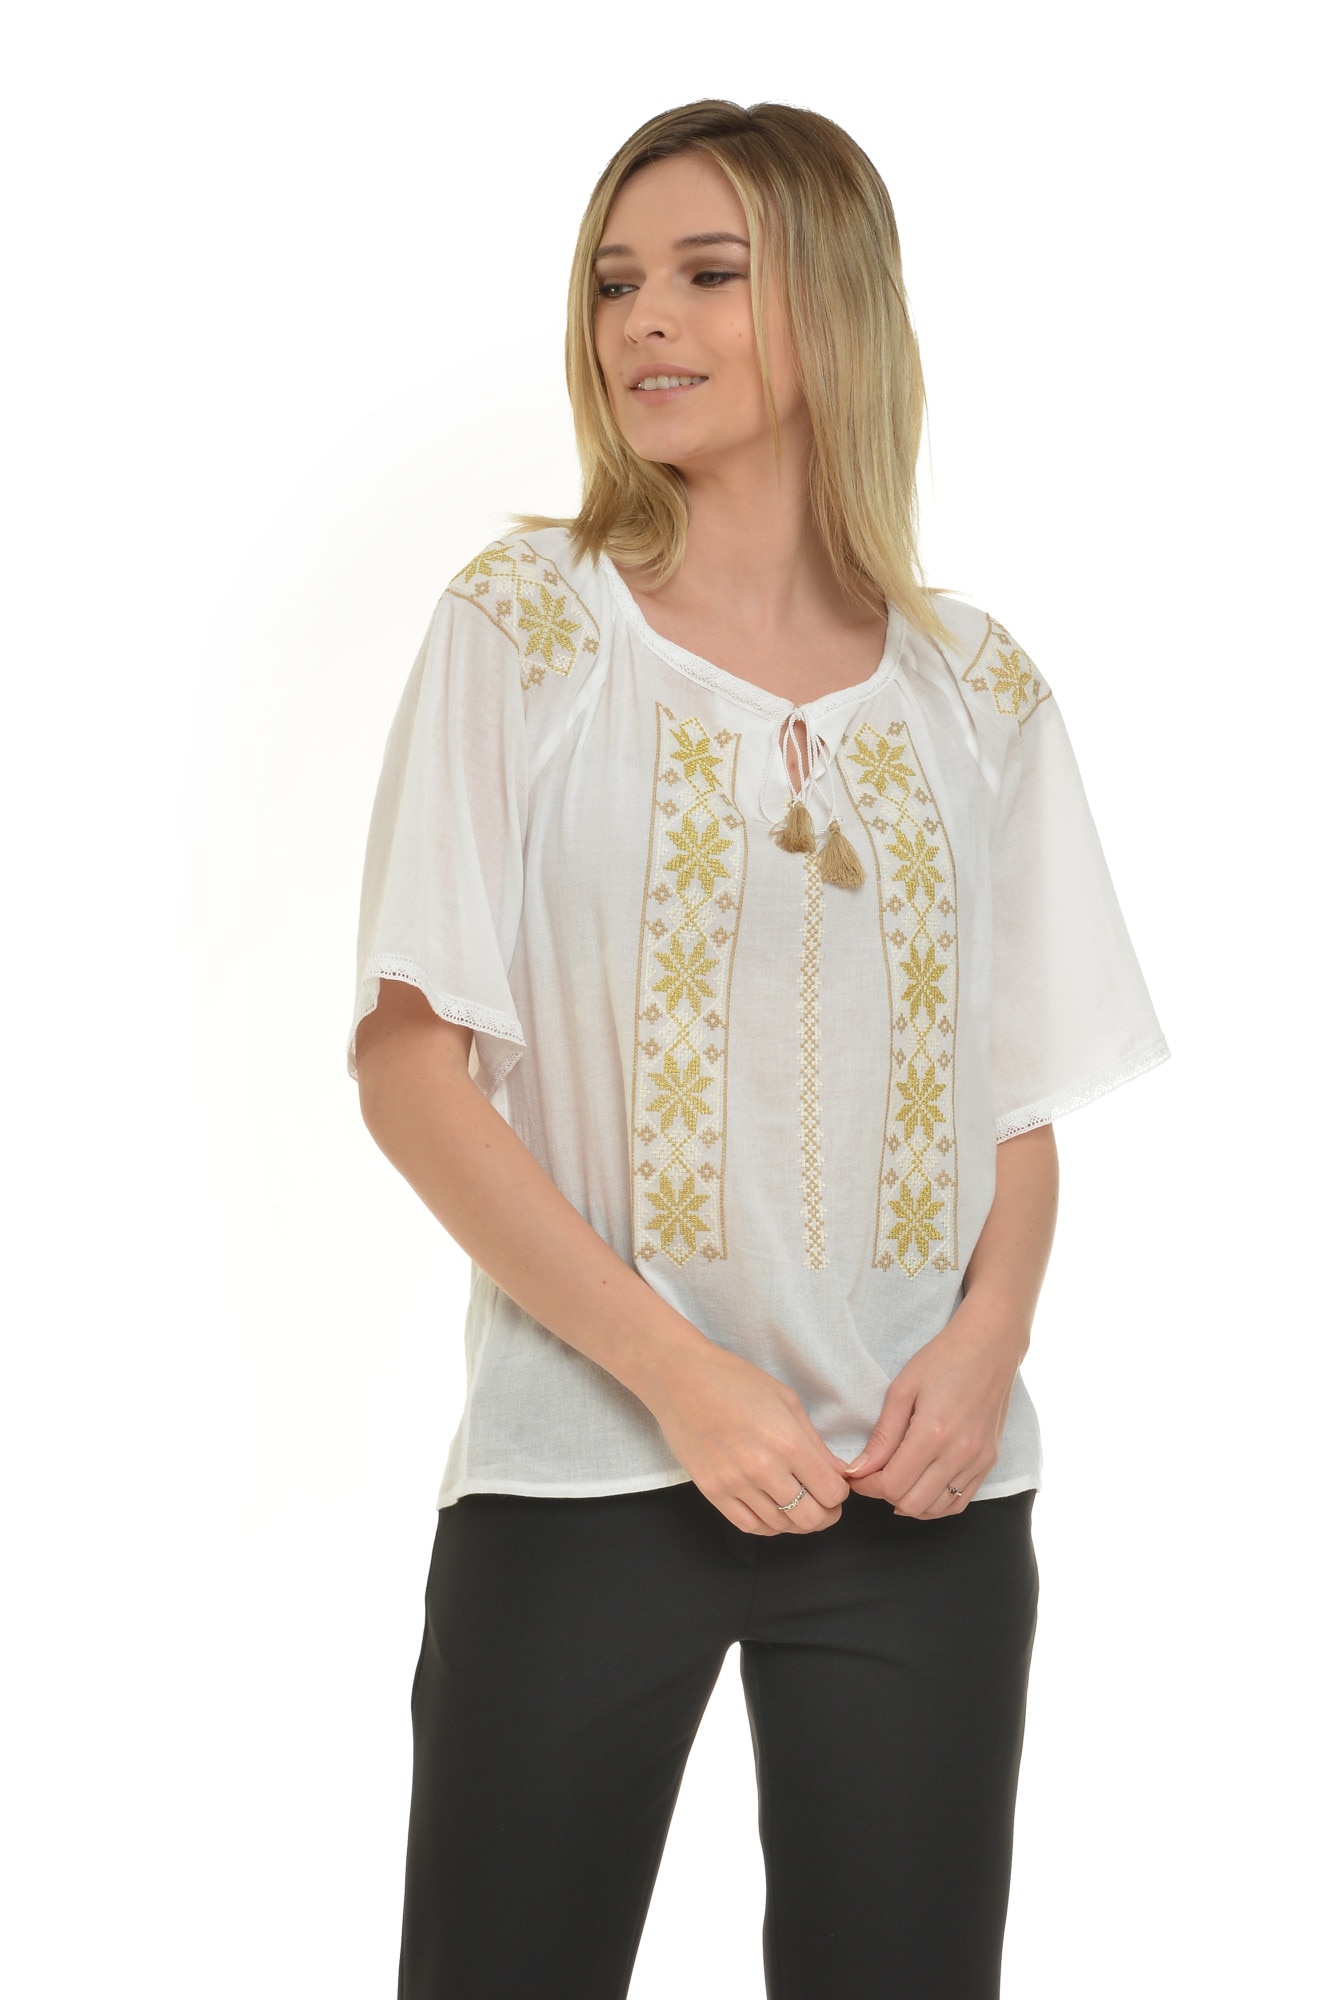 Review Company disconnected Bluza Ie Traditionala Romaneasca, panza topita, marime M, IE09A - eMAG.ro